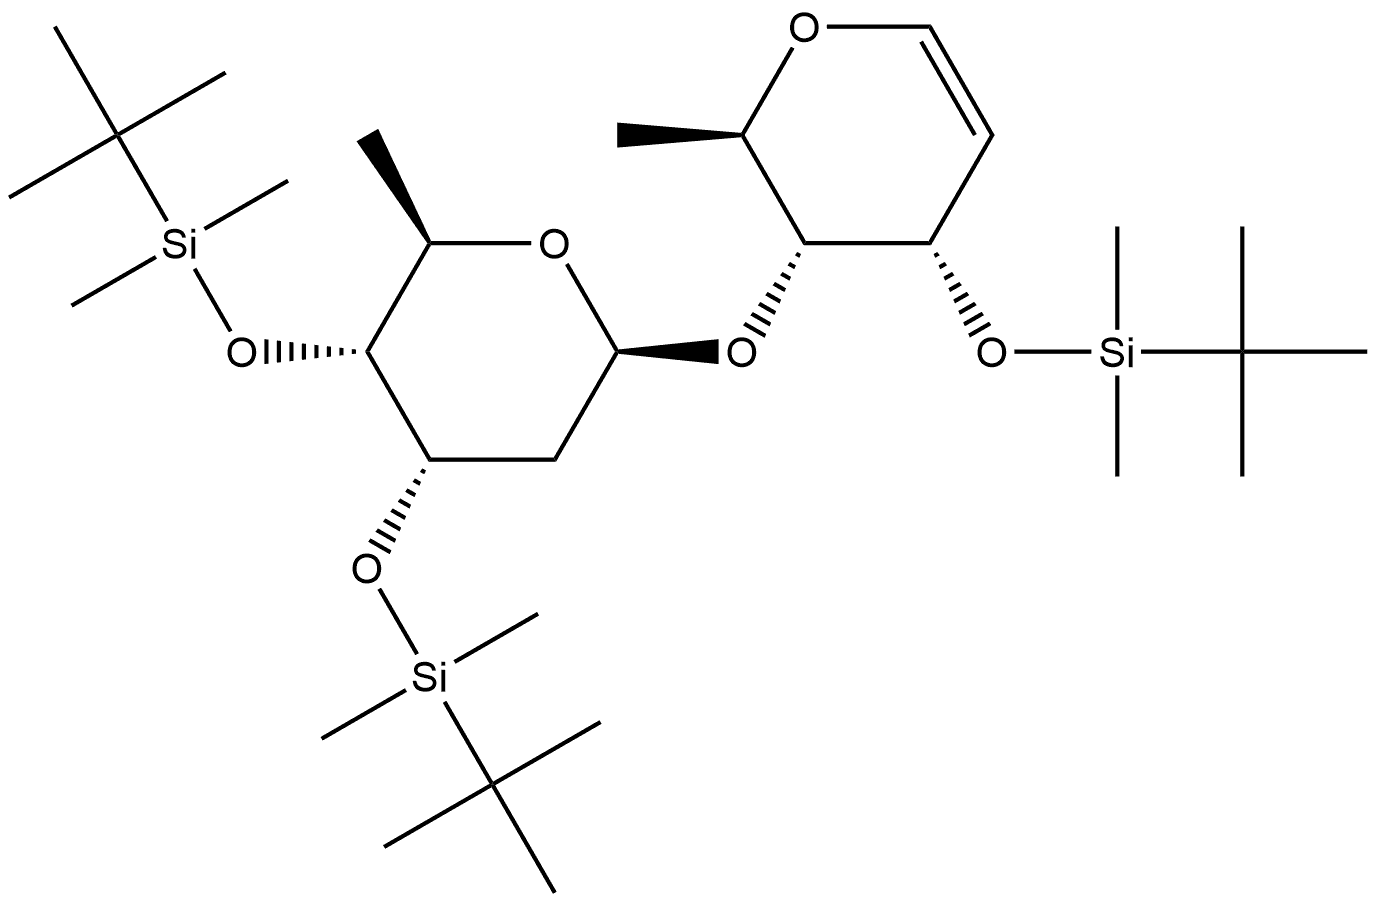 D-ribo-Hex-1-enitol, 1,5-anhydro-2,6-dideoxy-4-O-[2,6-dideoxy-3,4-bis-O-[(1,1-dimethylethyl)dimethylsilyl]-β-D-ribo-hexopyranosyl]-3-O-[(1,1-dimethylethyl)dimethylsilyl]- 结构式